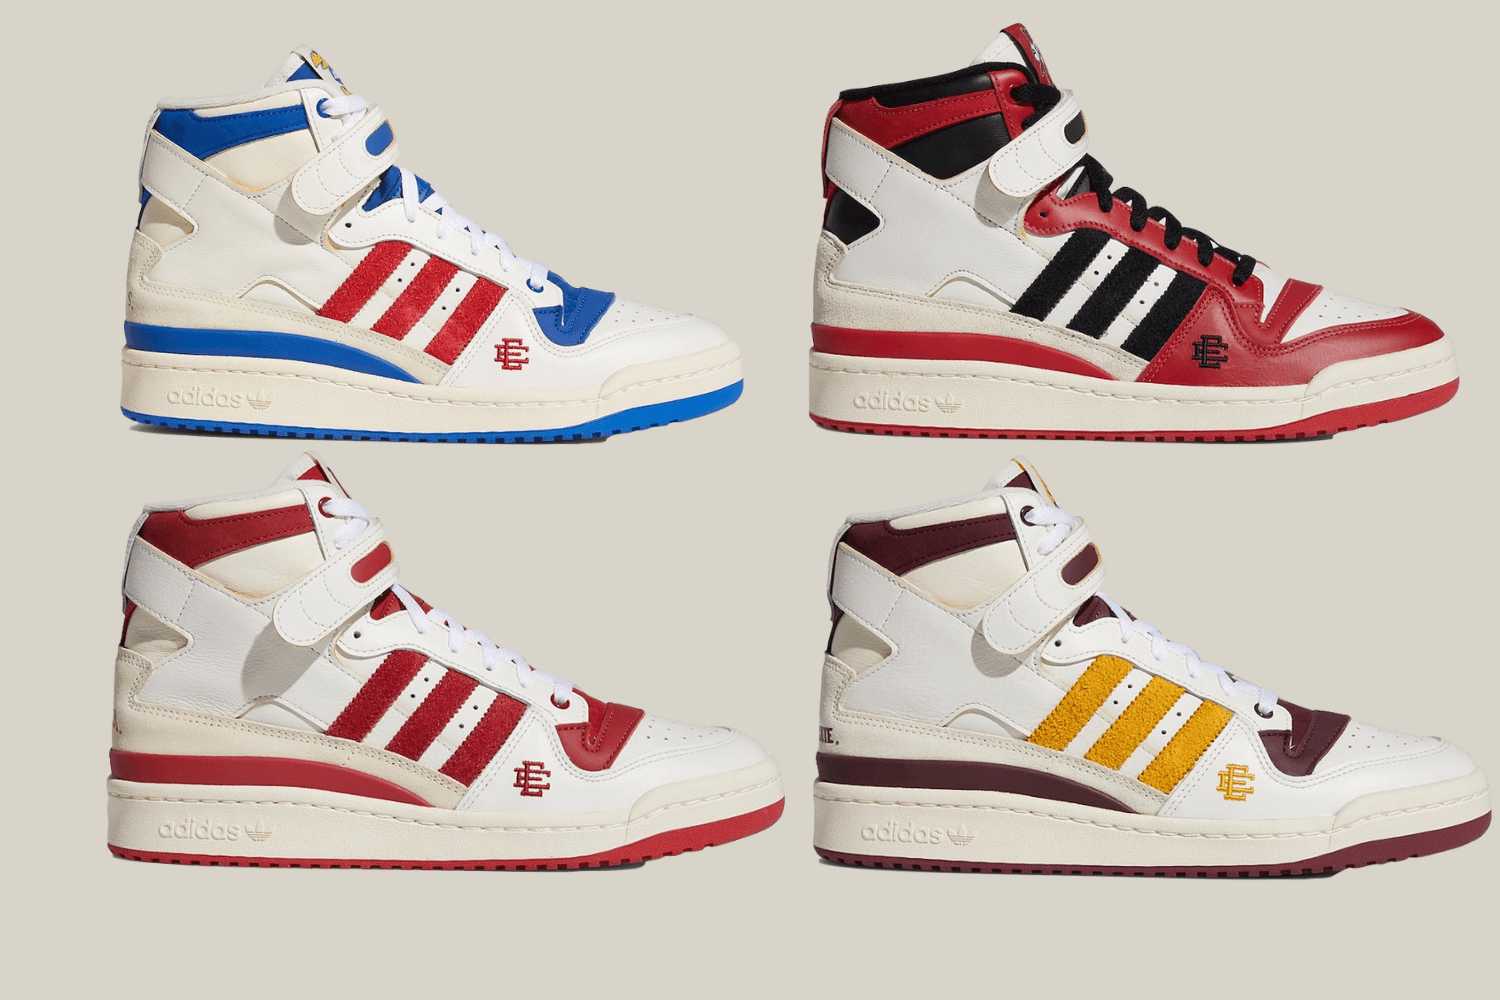 The Eric Emanuel x adidas Forum High 'College' Pack